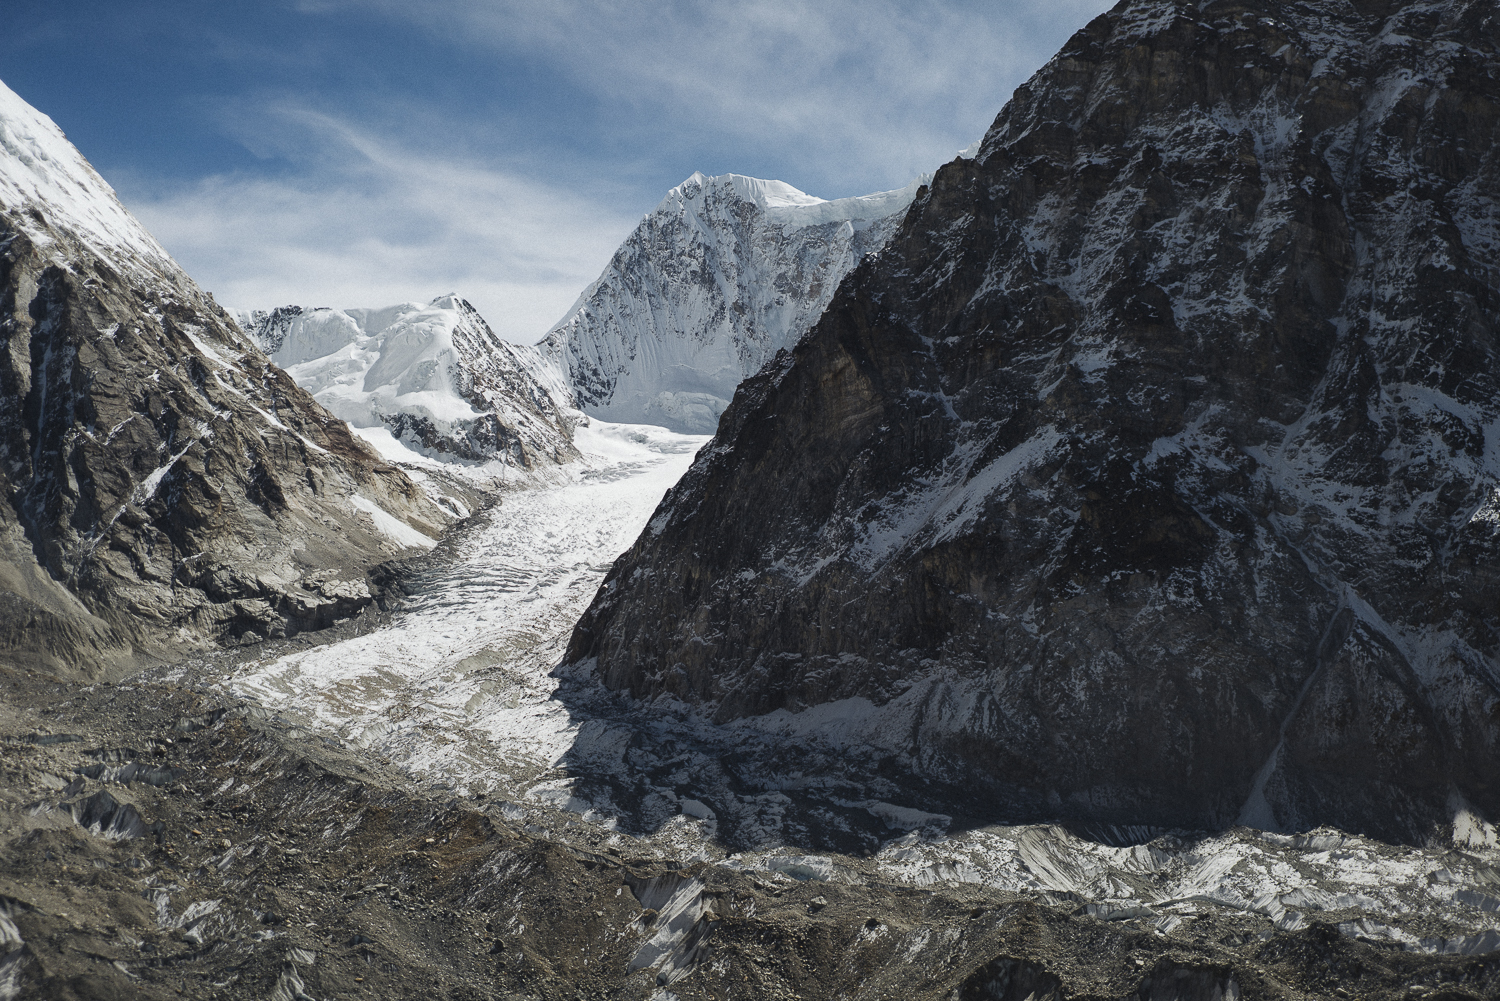 This photo shows Gimmigela East (7005m) from a vantage point above the team's base camp. Auer wrote, Our plan of putting up a base camp with a direct view to the mountain was shut down by our porters. They all stopped in Camp Pangpema, the base camp for Kangchenjunga (8586m). We convinced five of them to shuttle up our loads a little bit higher during a few days. [Photo] Elias Holzkenecht